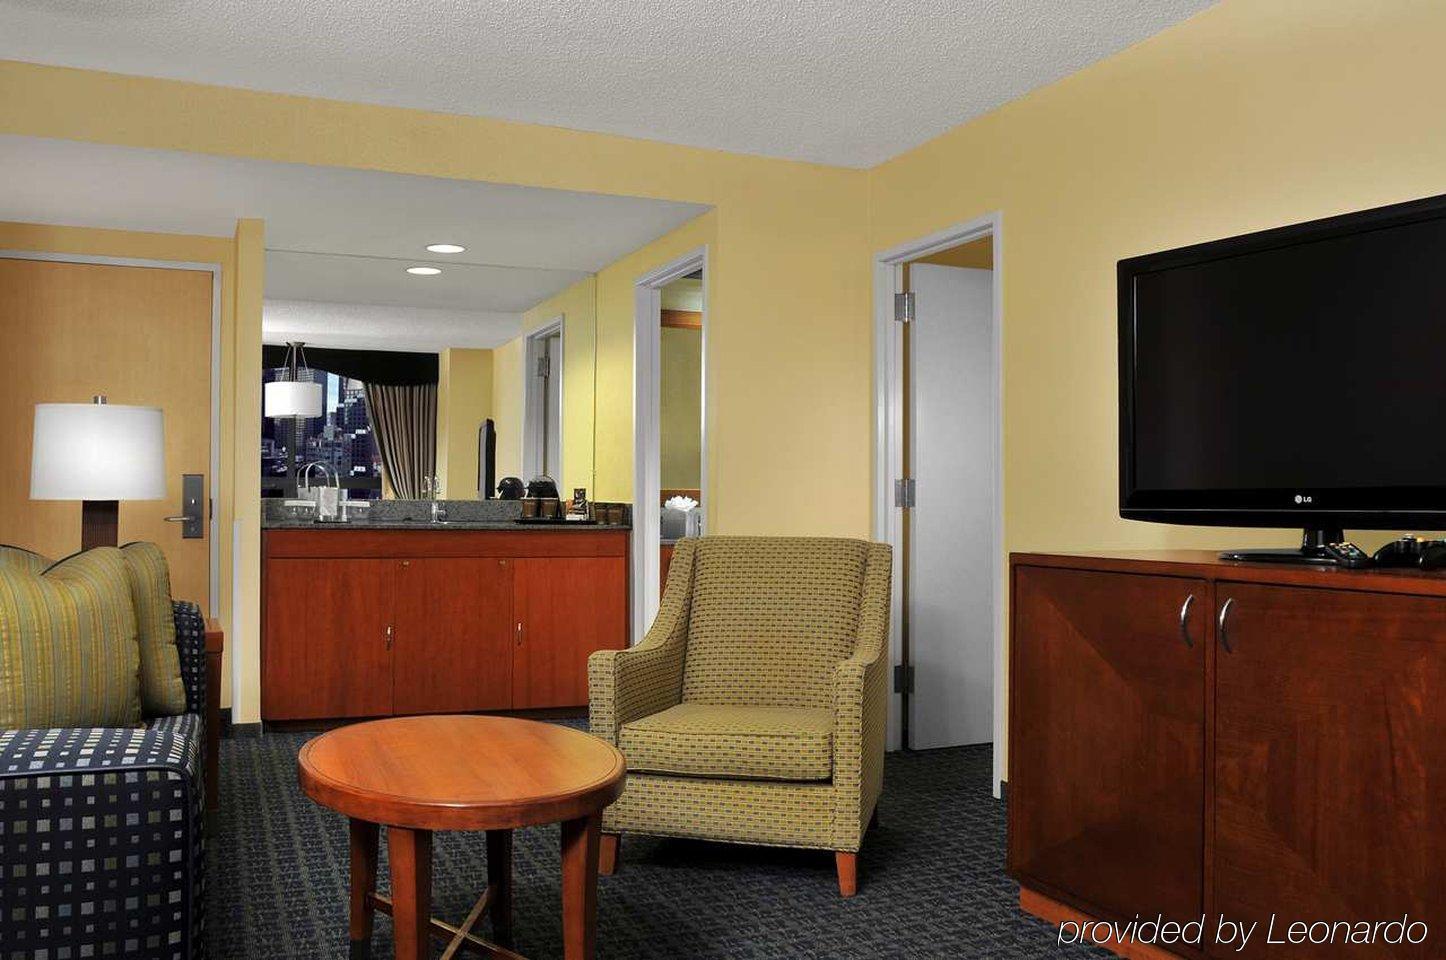 Doubletree Suites By Hilton Nyc - Times Square New York Room photo